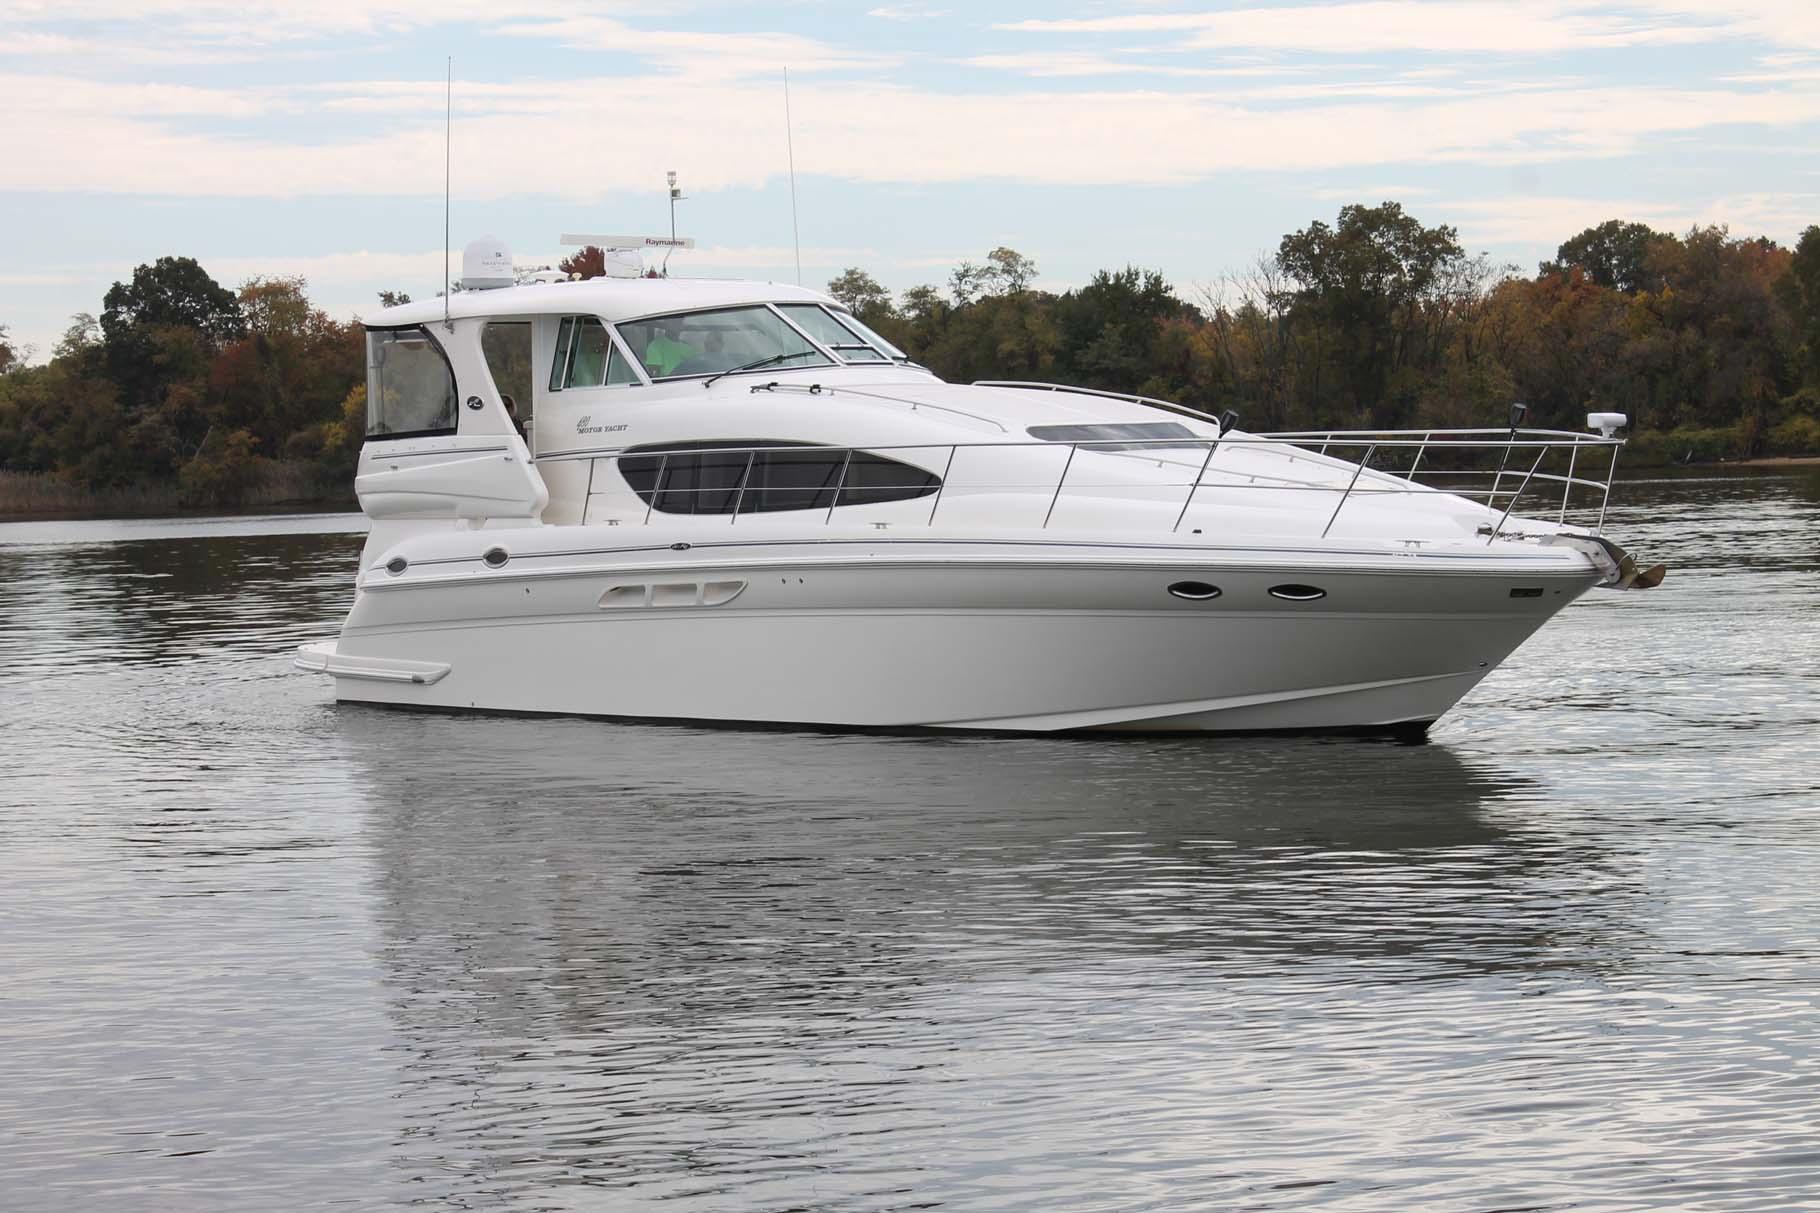 La Dolce Vita Yacht for Sale  48 Sea Ray Yachts Baltimore, MD